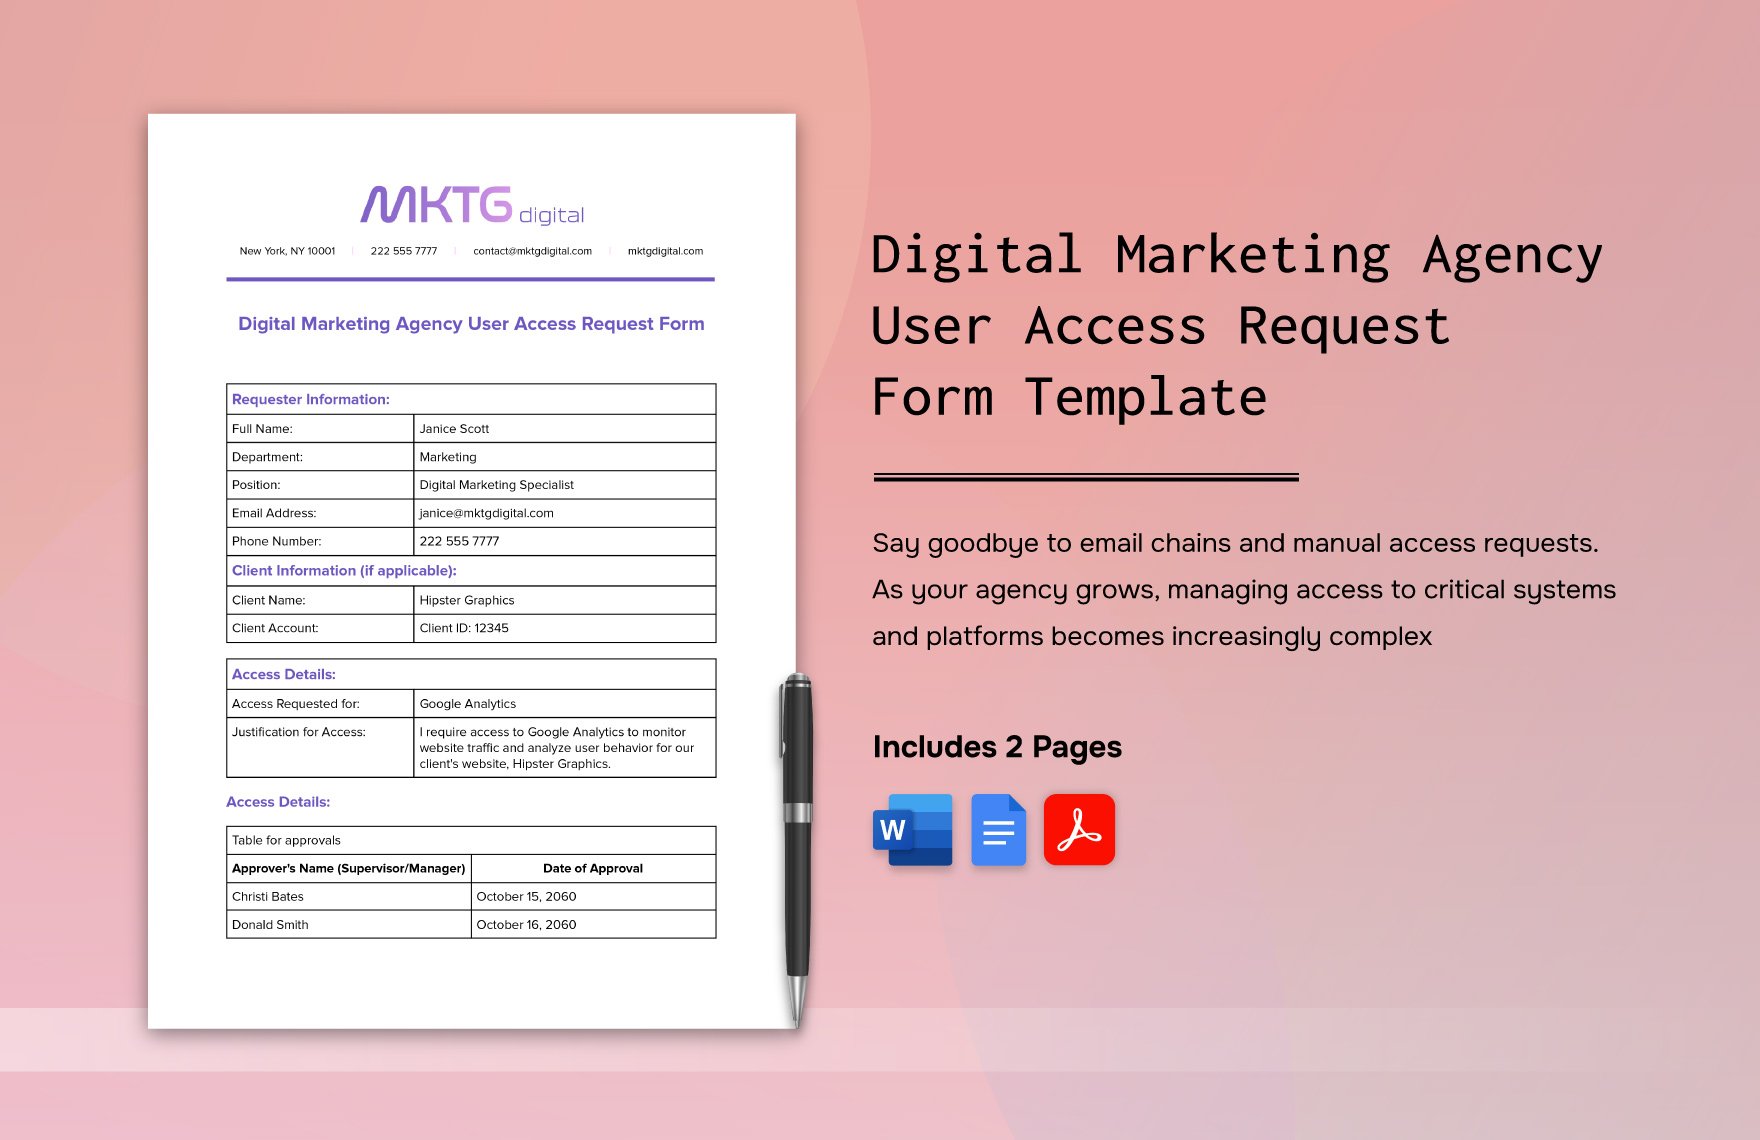 Digital Marketing Agency User Access Request Form Template in Word, Google Docs, PDF